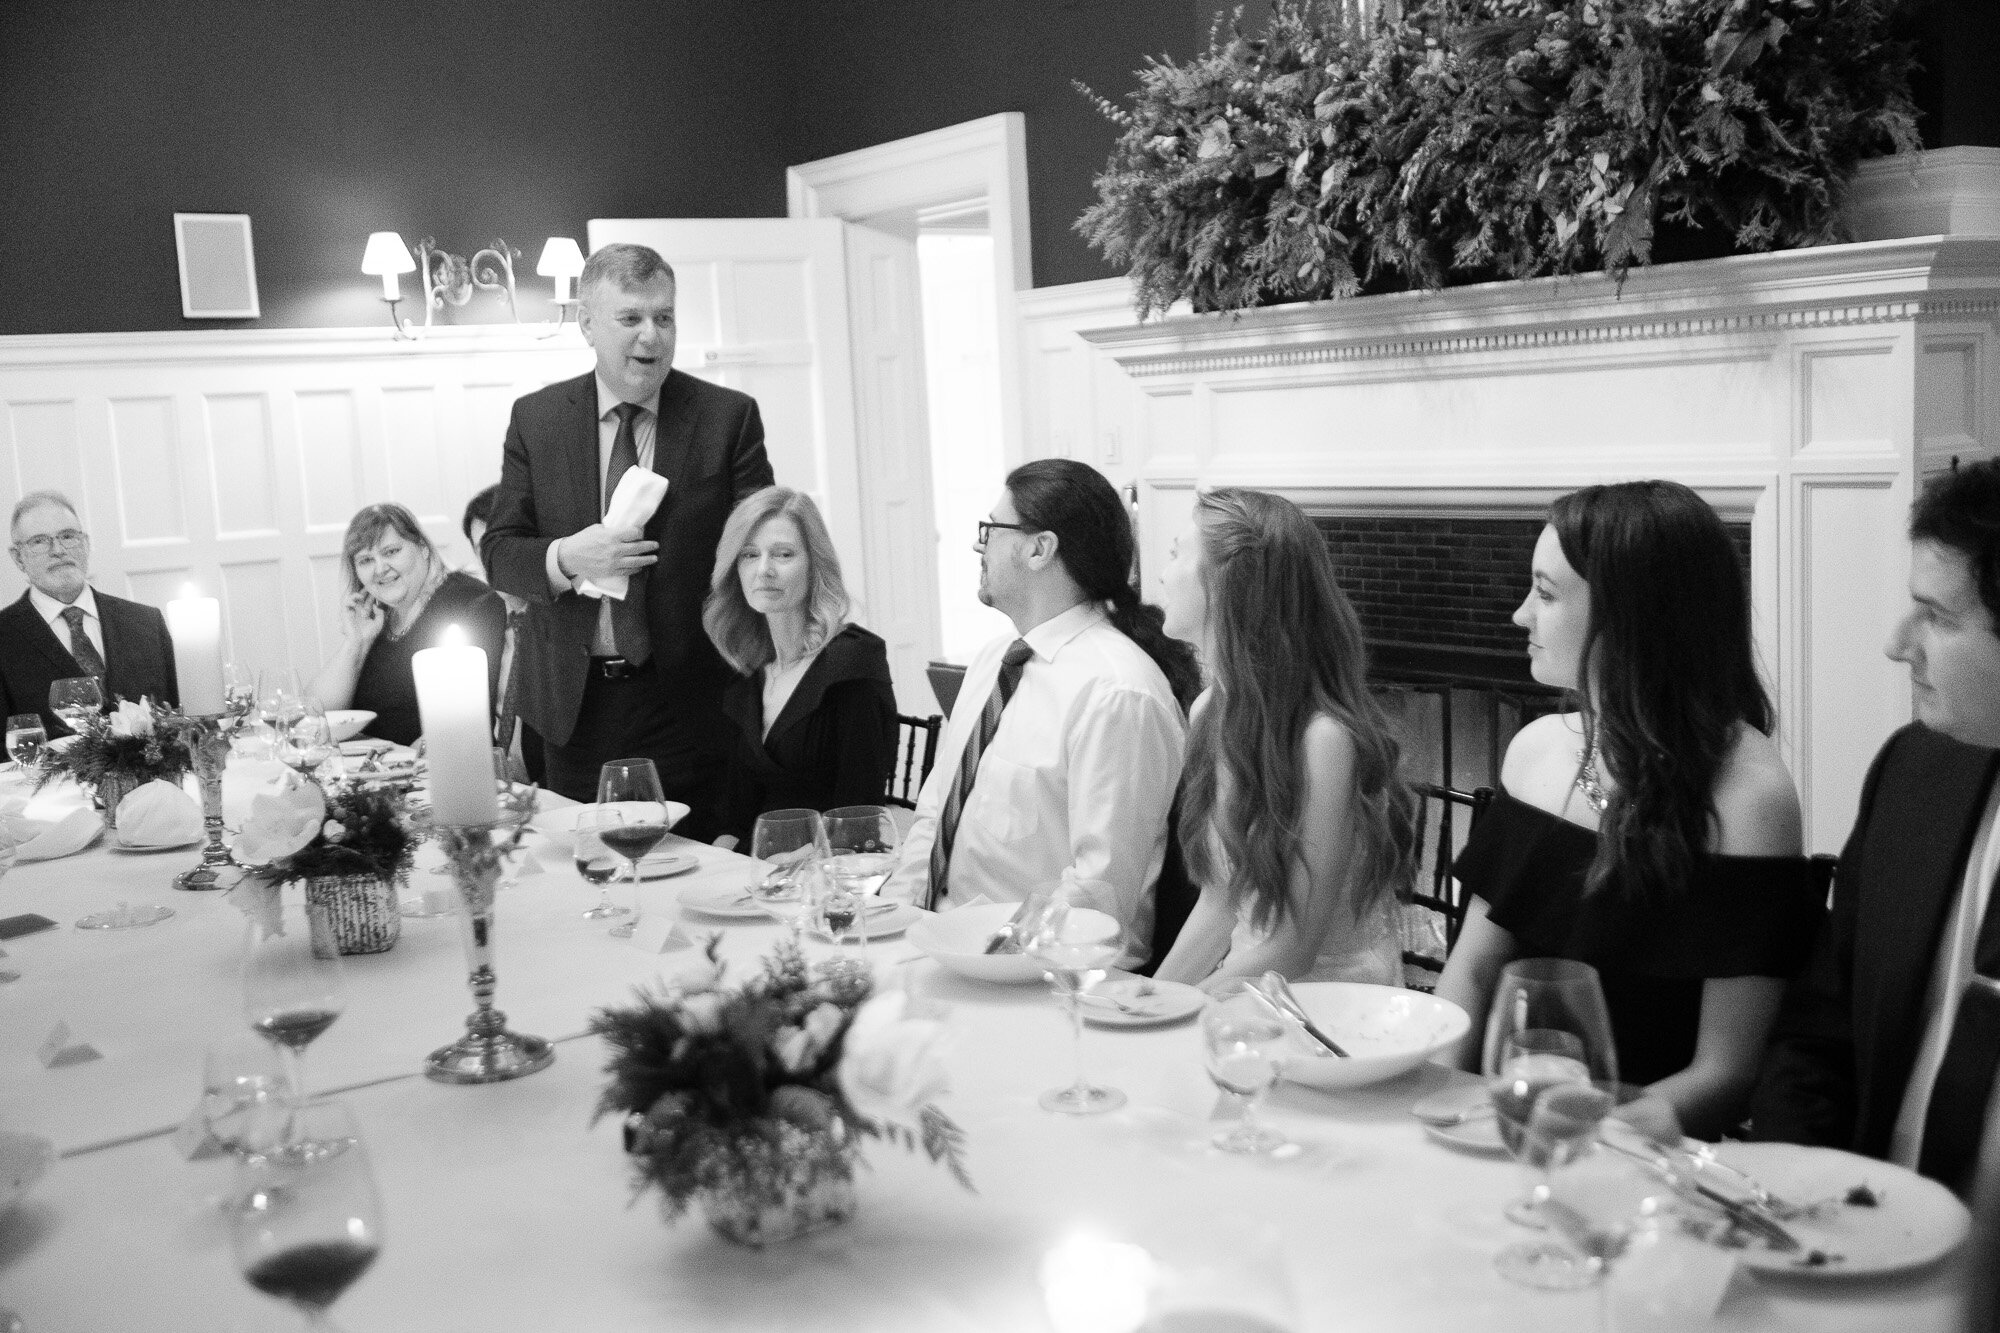  Laura’s father gives an impromptu toast during the dinner reception at their Langdon Hall wedding in Cambridge, Ontario.  Wedding photograph by Toronto wedding photographer Scott Williams (www.scottwilliamsphotographer.com) 